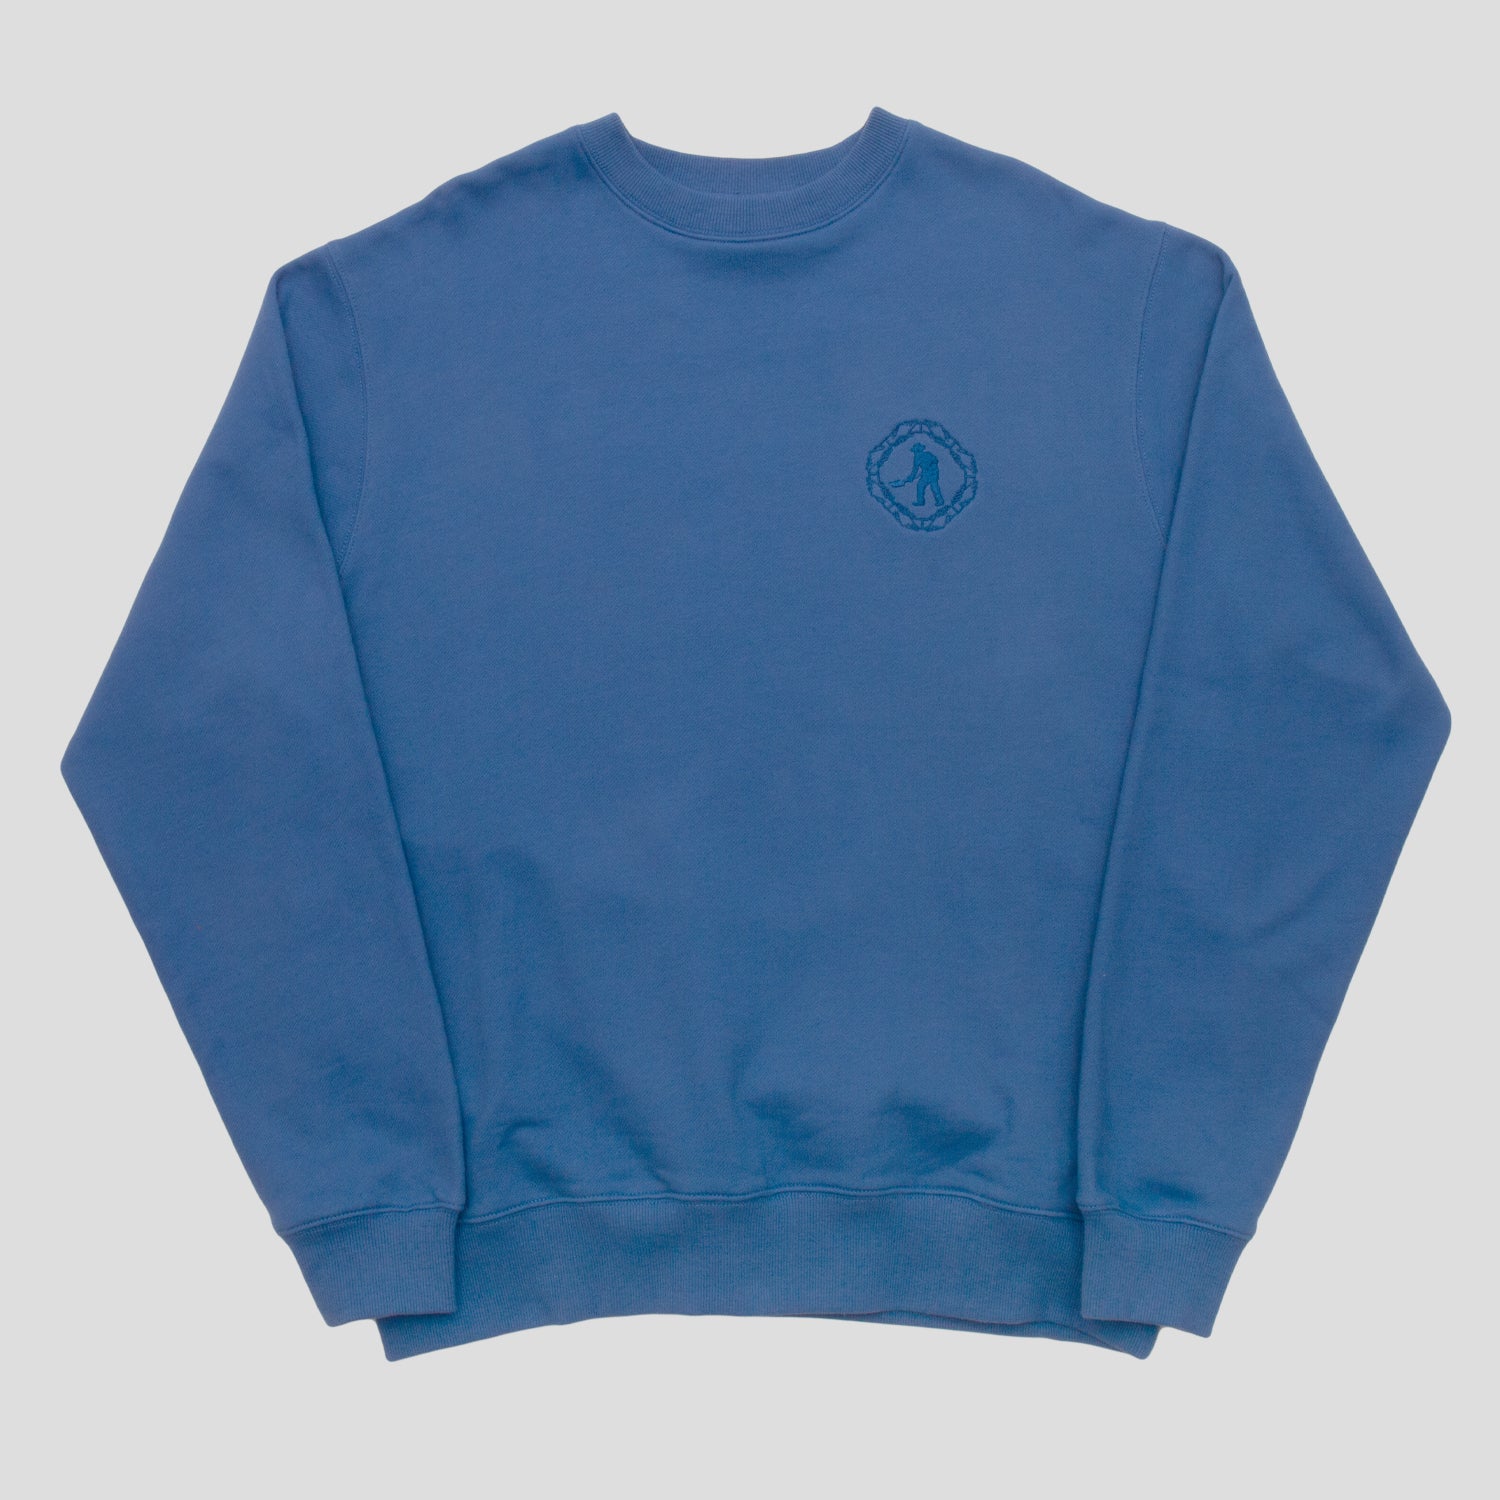 Pass~Port Organic Embroidery Sweater - Royal Blue